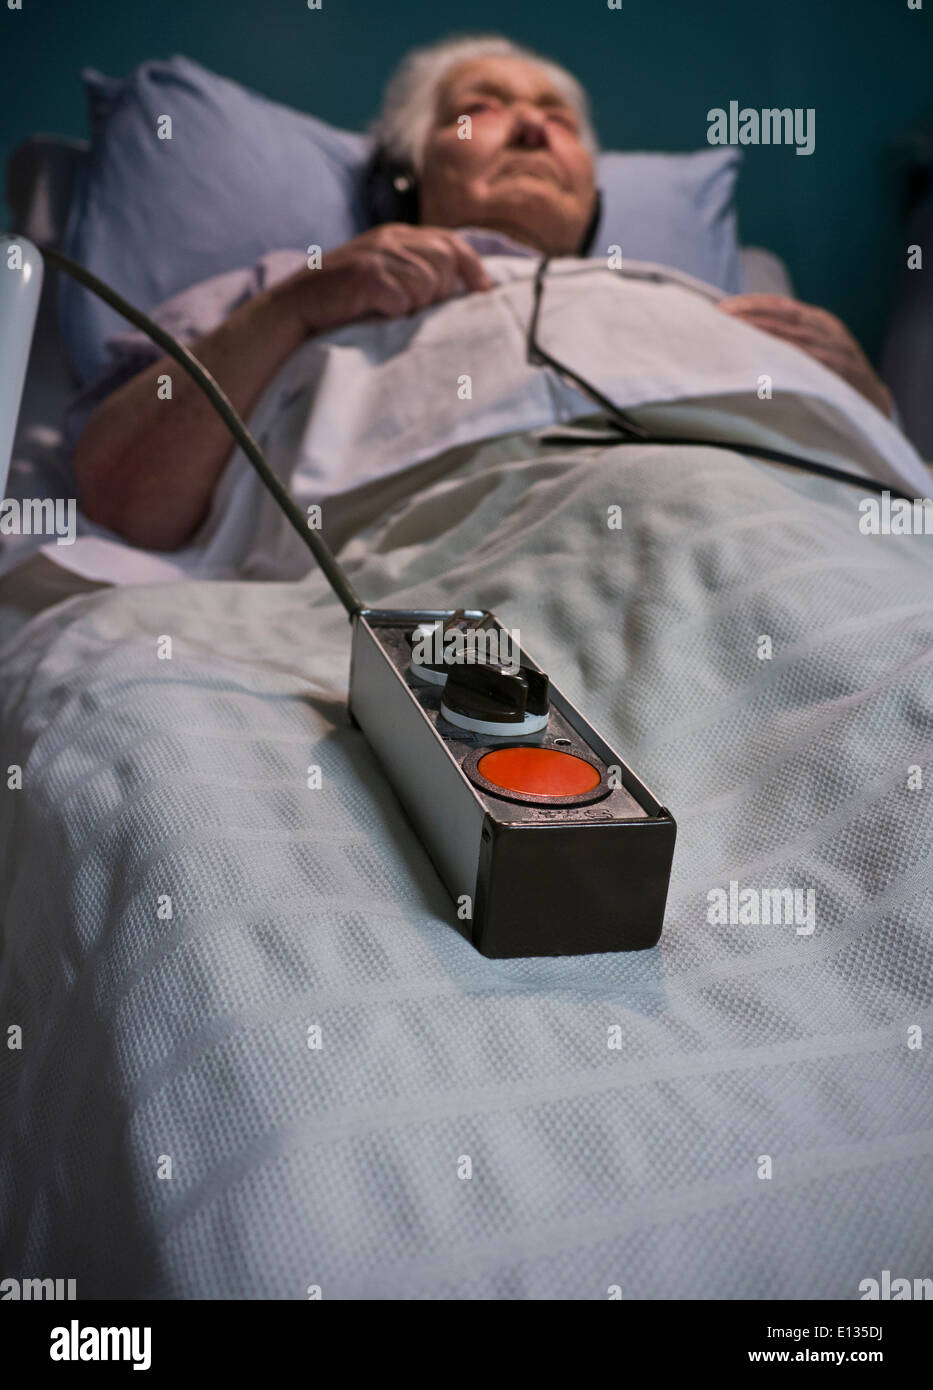 EMERGENCY CALL BUTTON CARE Elderly lady wearing headphones in hospital care bed at night with emergency call button lying to her side Stock Photo